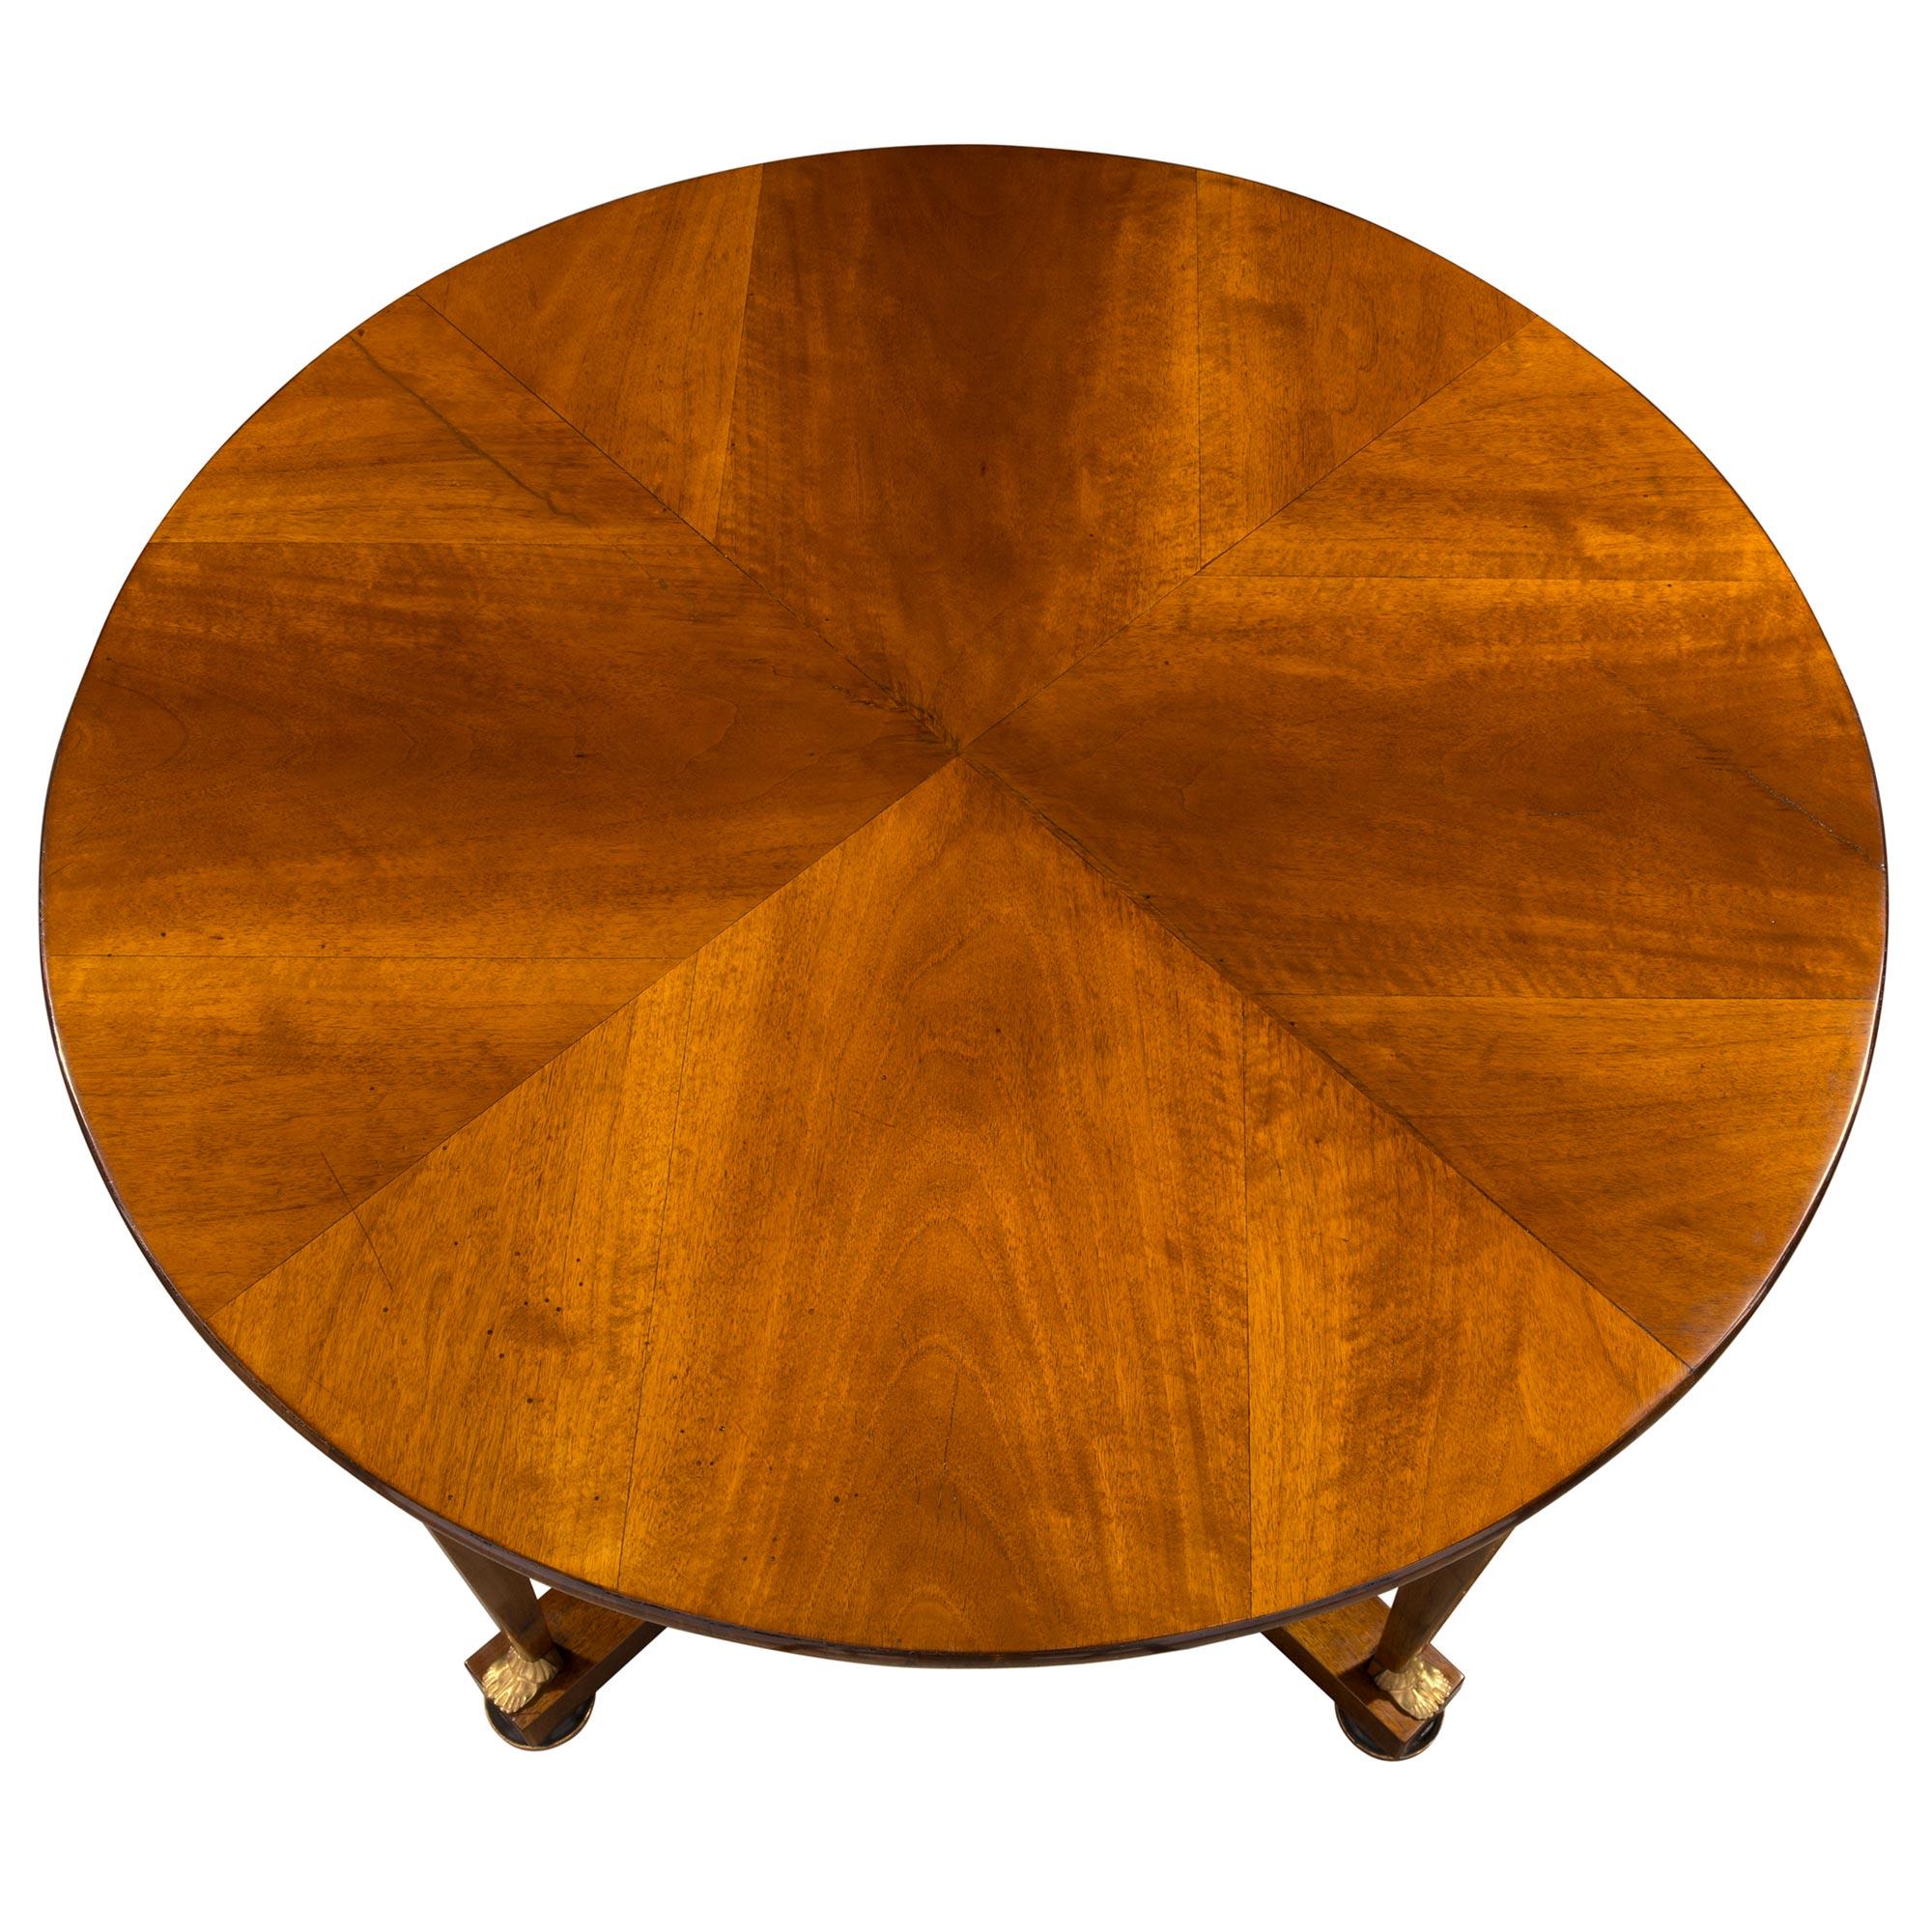 A handsome Italian early 19th century neoclassical walnut, ebonized Fruitwood, ormolu and giltwood circular center table from Lucca. The table is raised by lovely ebonized Fruitwood bun feet with a fine wrap around giltwood band. At the center is